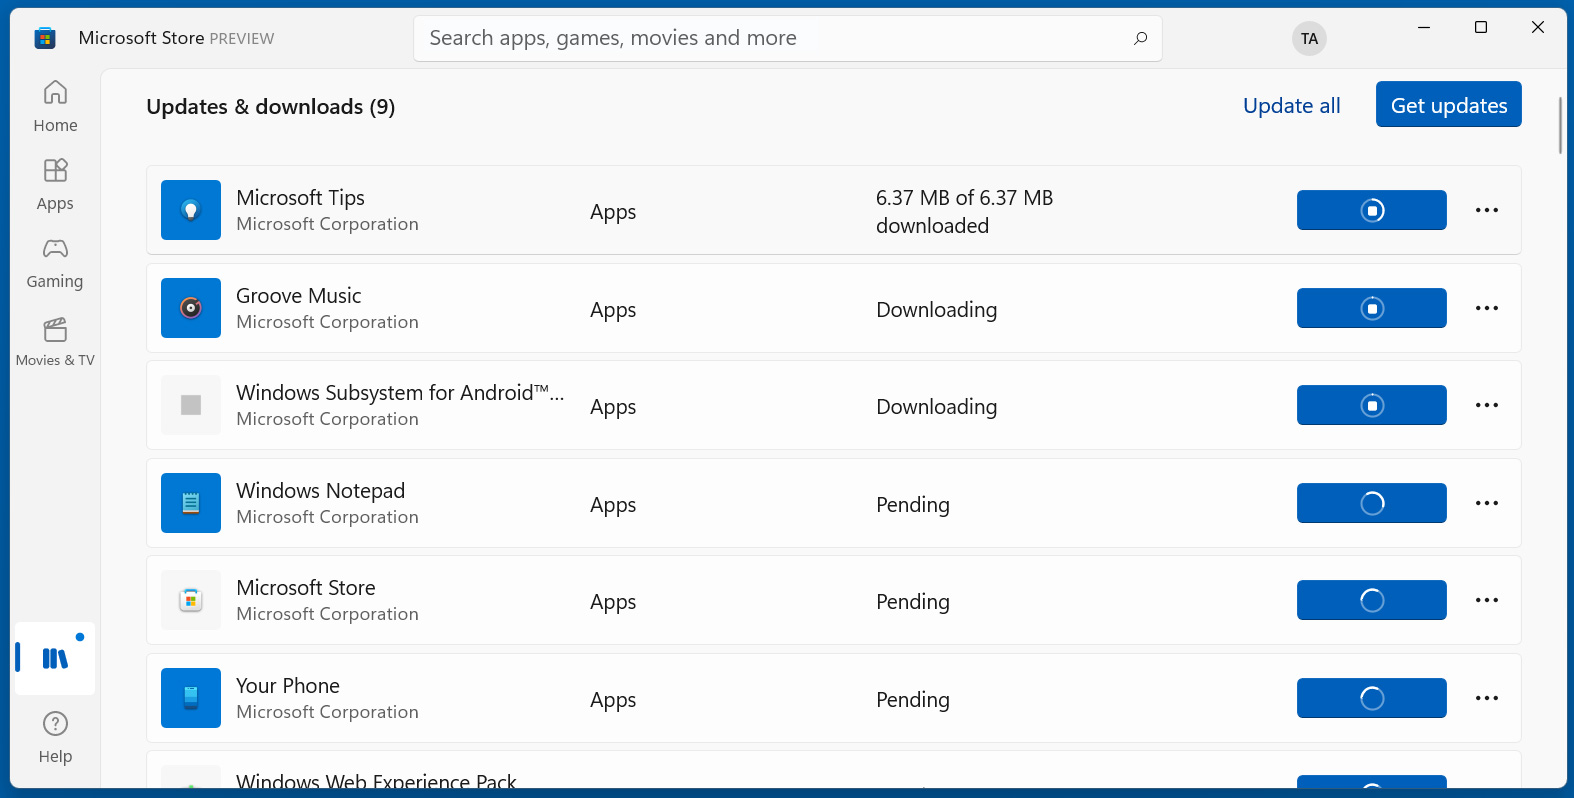 Windows Subsystem for Android installed via the Microsoft Store